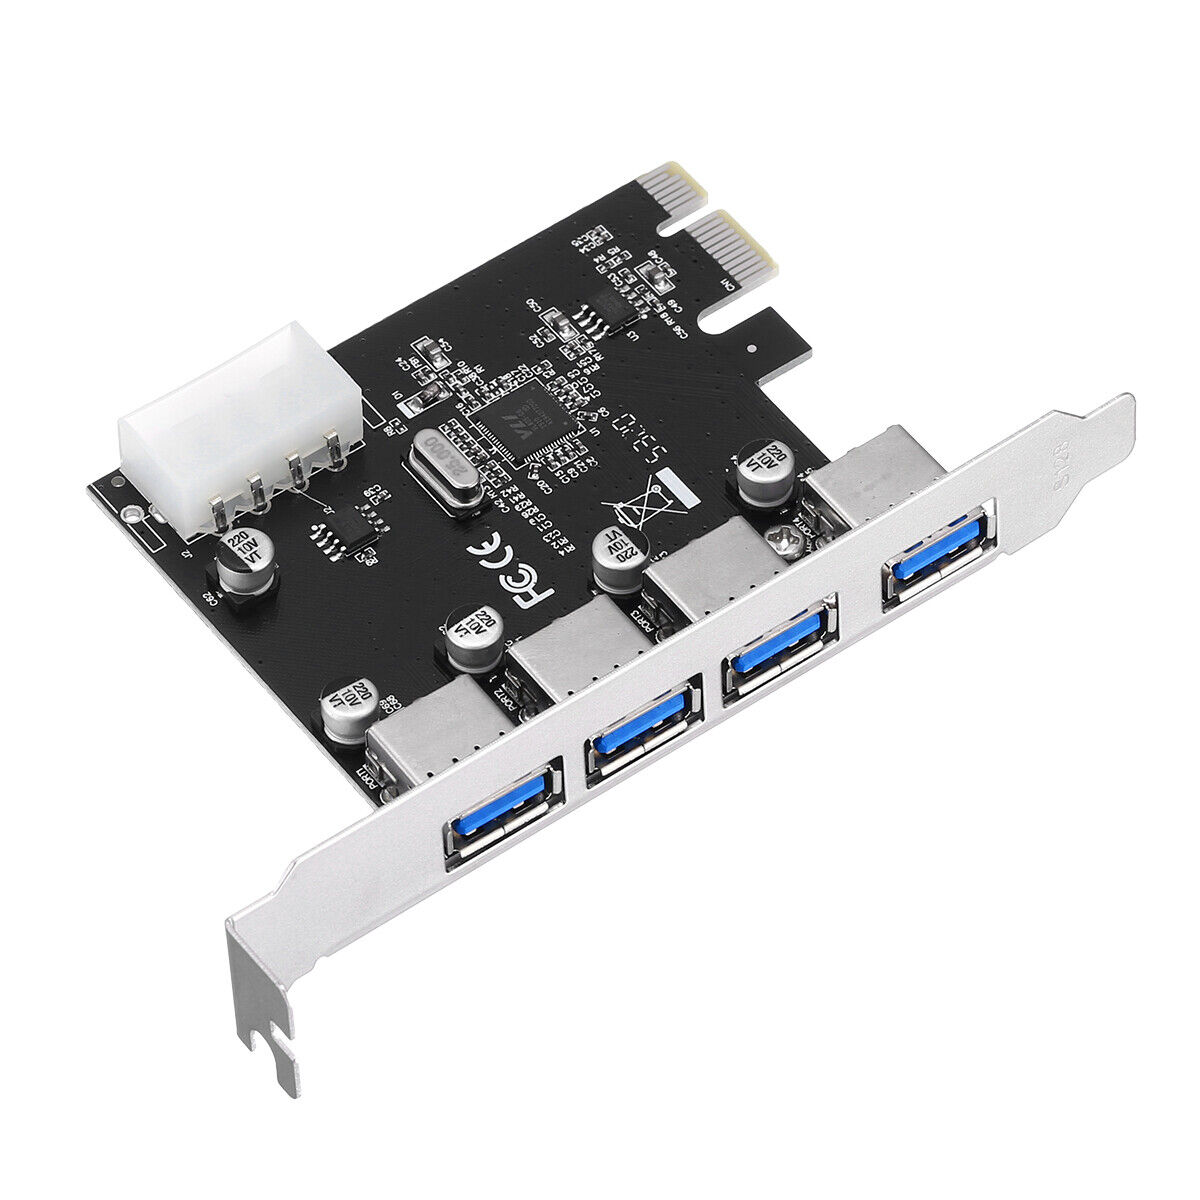 4-Port 5Gbps PCI-E Express to USB 3.0 Controller Expansion Card Adapter for PC Unbranded Does not apply - фотография #9